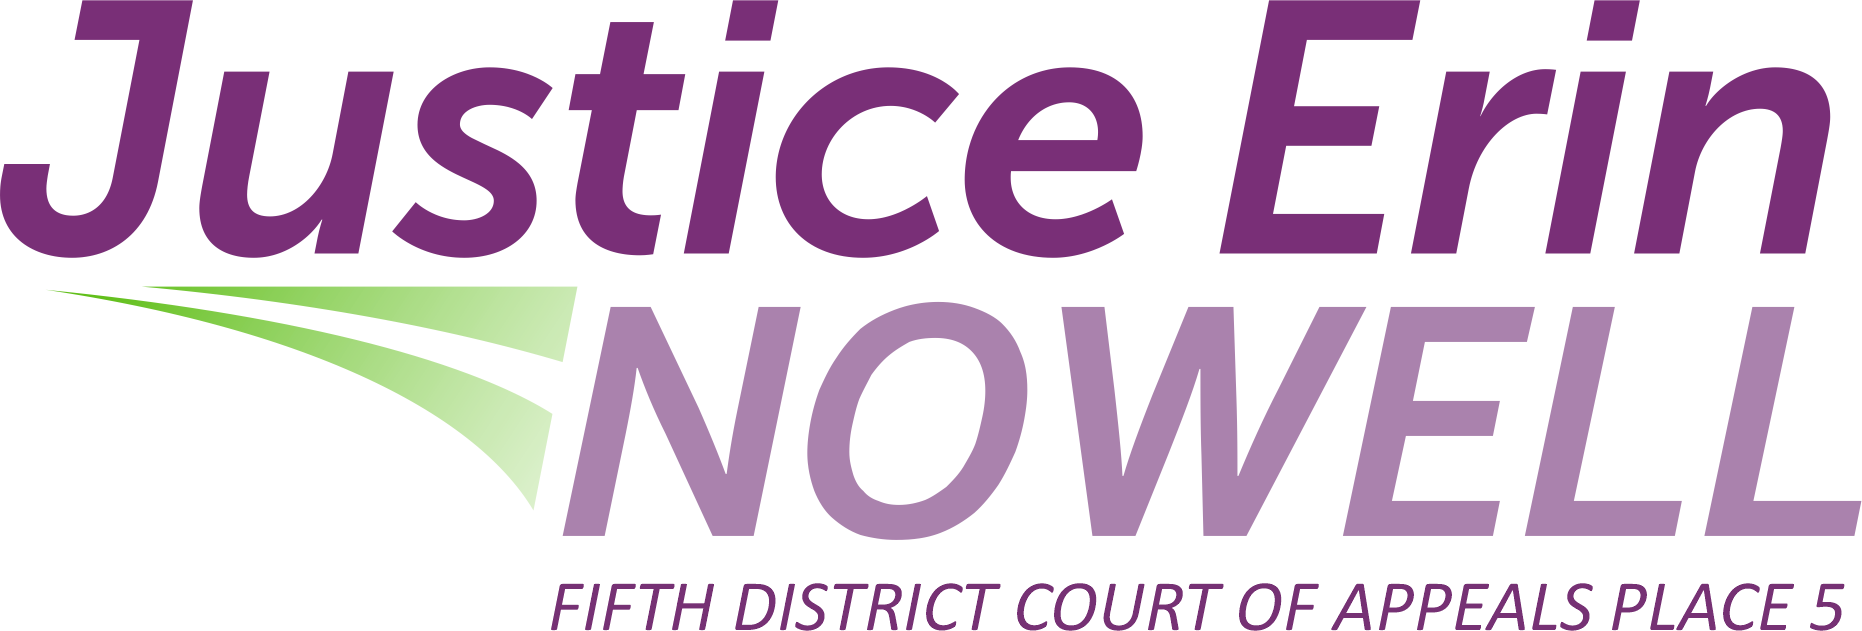 Erin Nowell for Justice logo